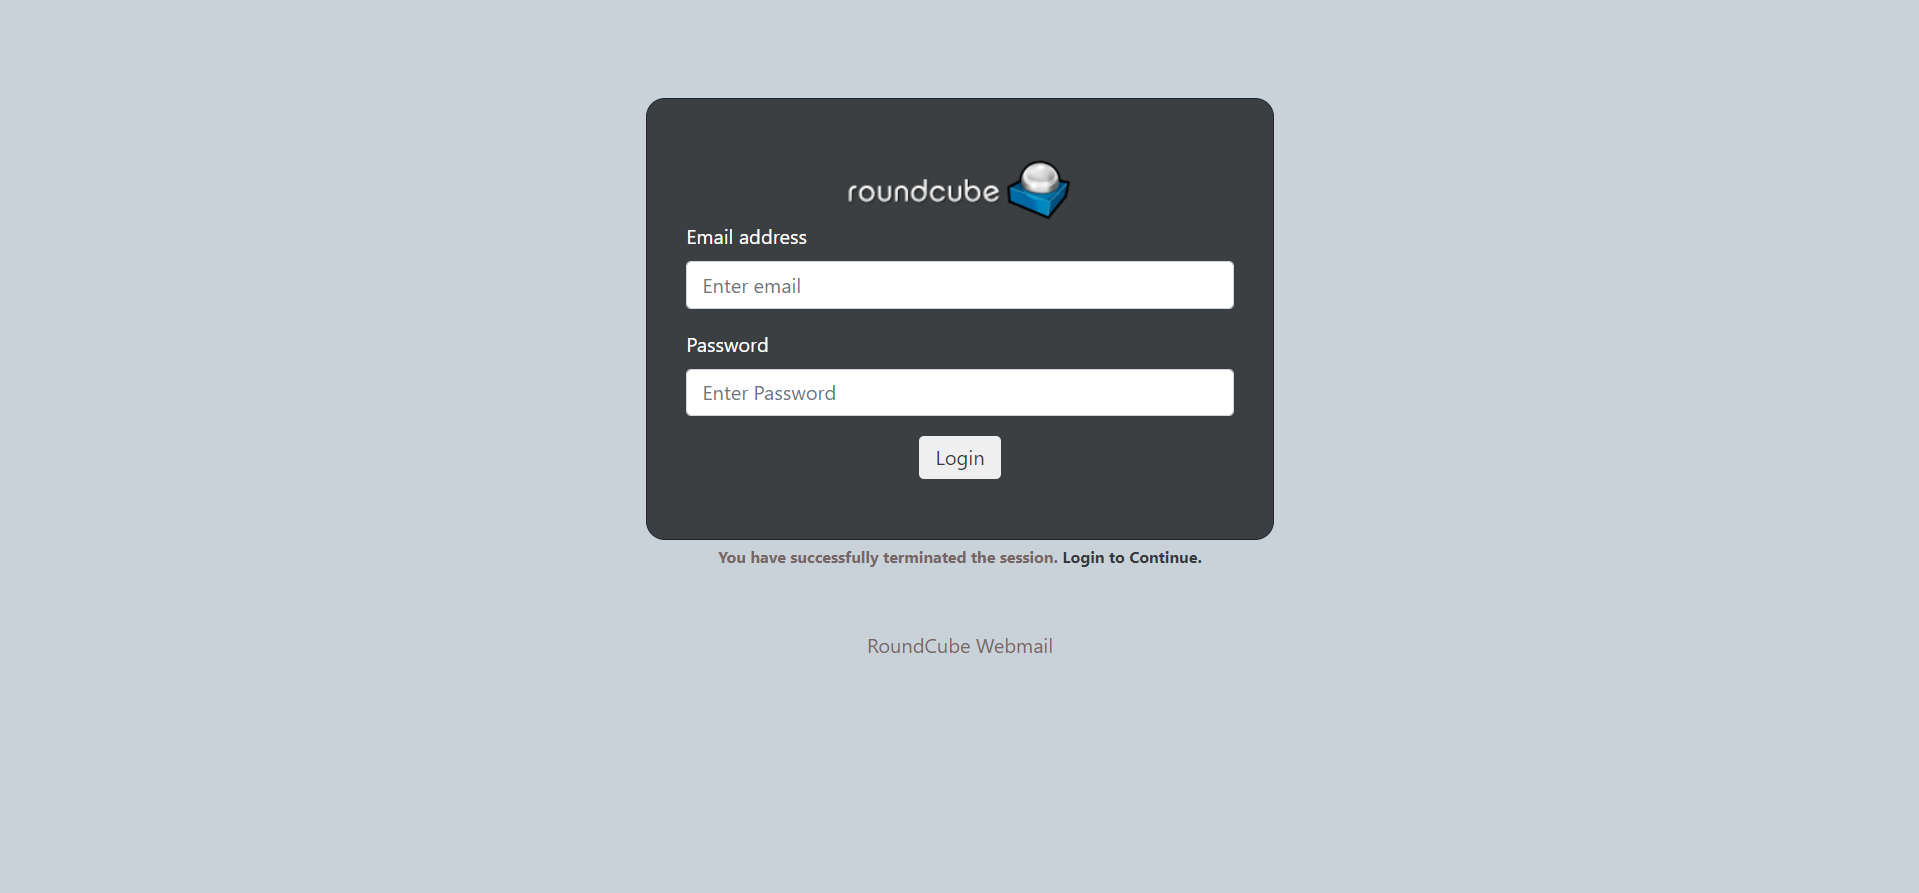 Roundcube webmail scampage 2021